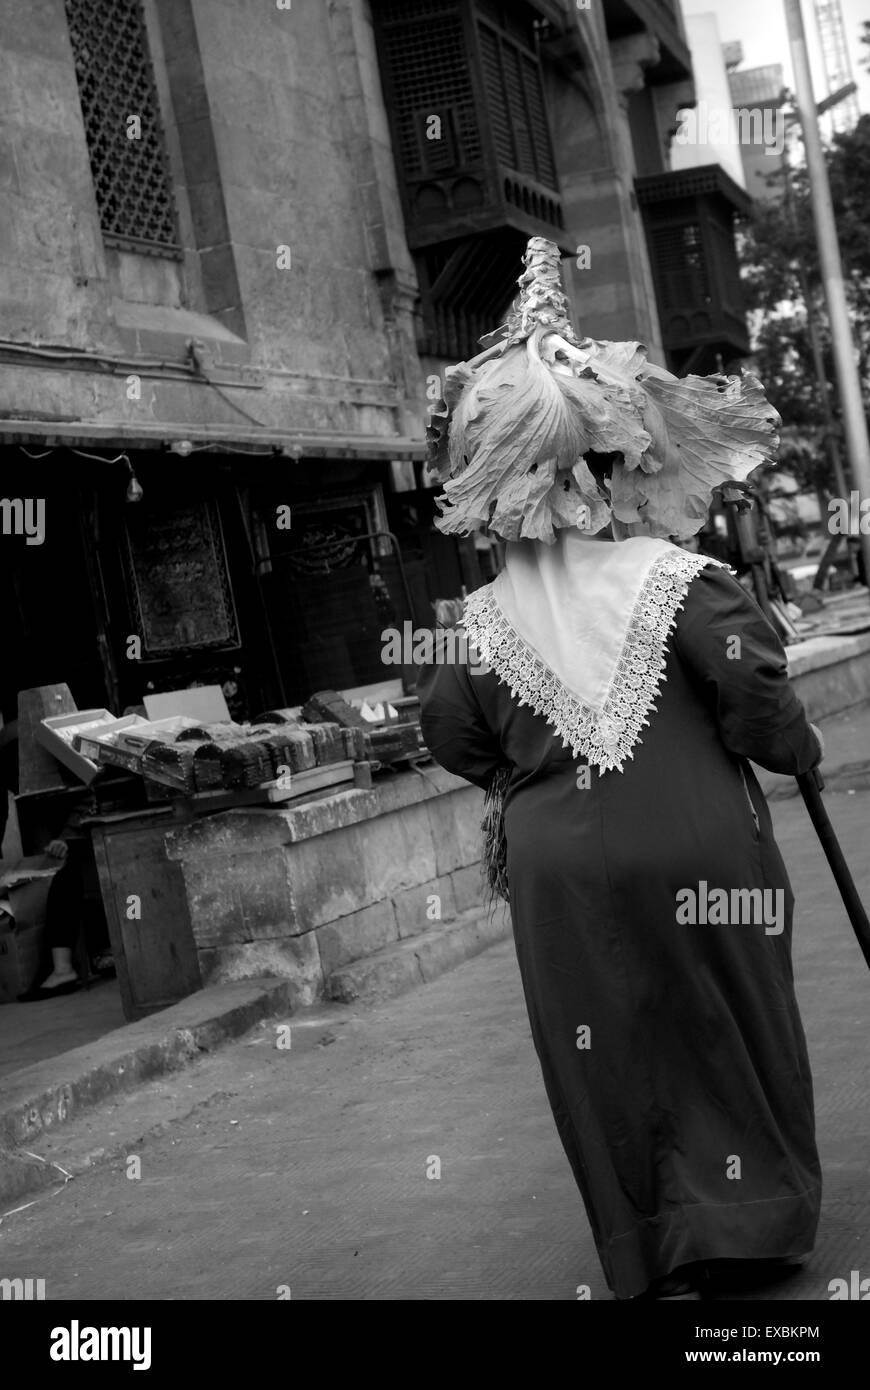 Woman carrying cabbages on her head, Cairo, Egypt Stock Photo